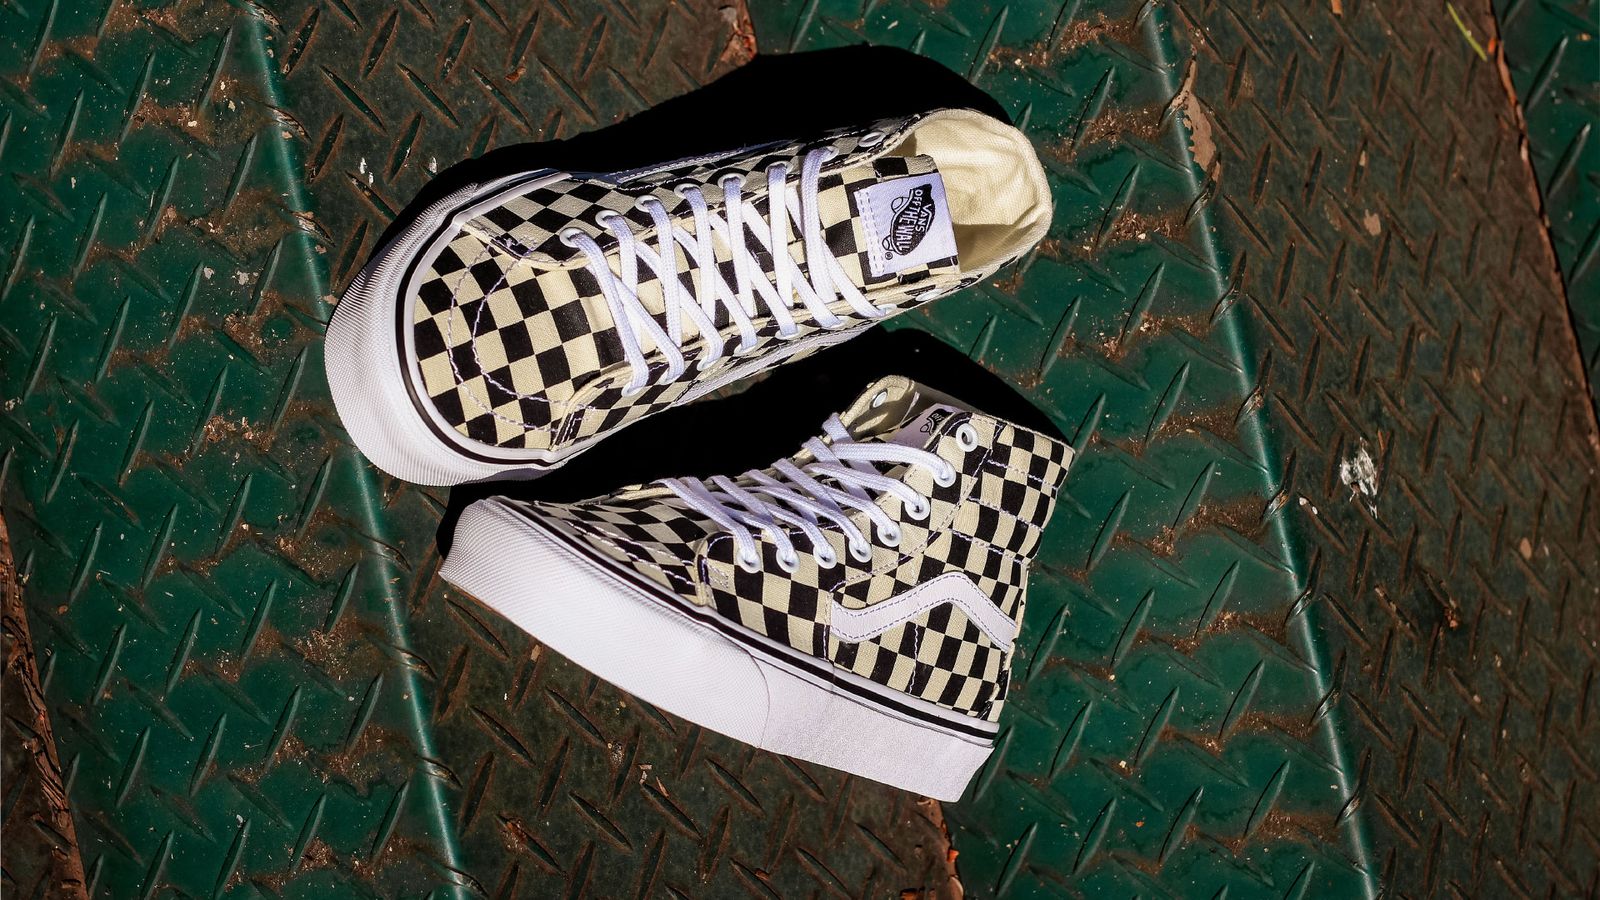 Vans Sk8-Hi image of a pair of white and black checkerboard sneakers.